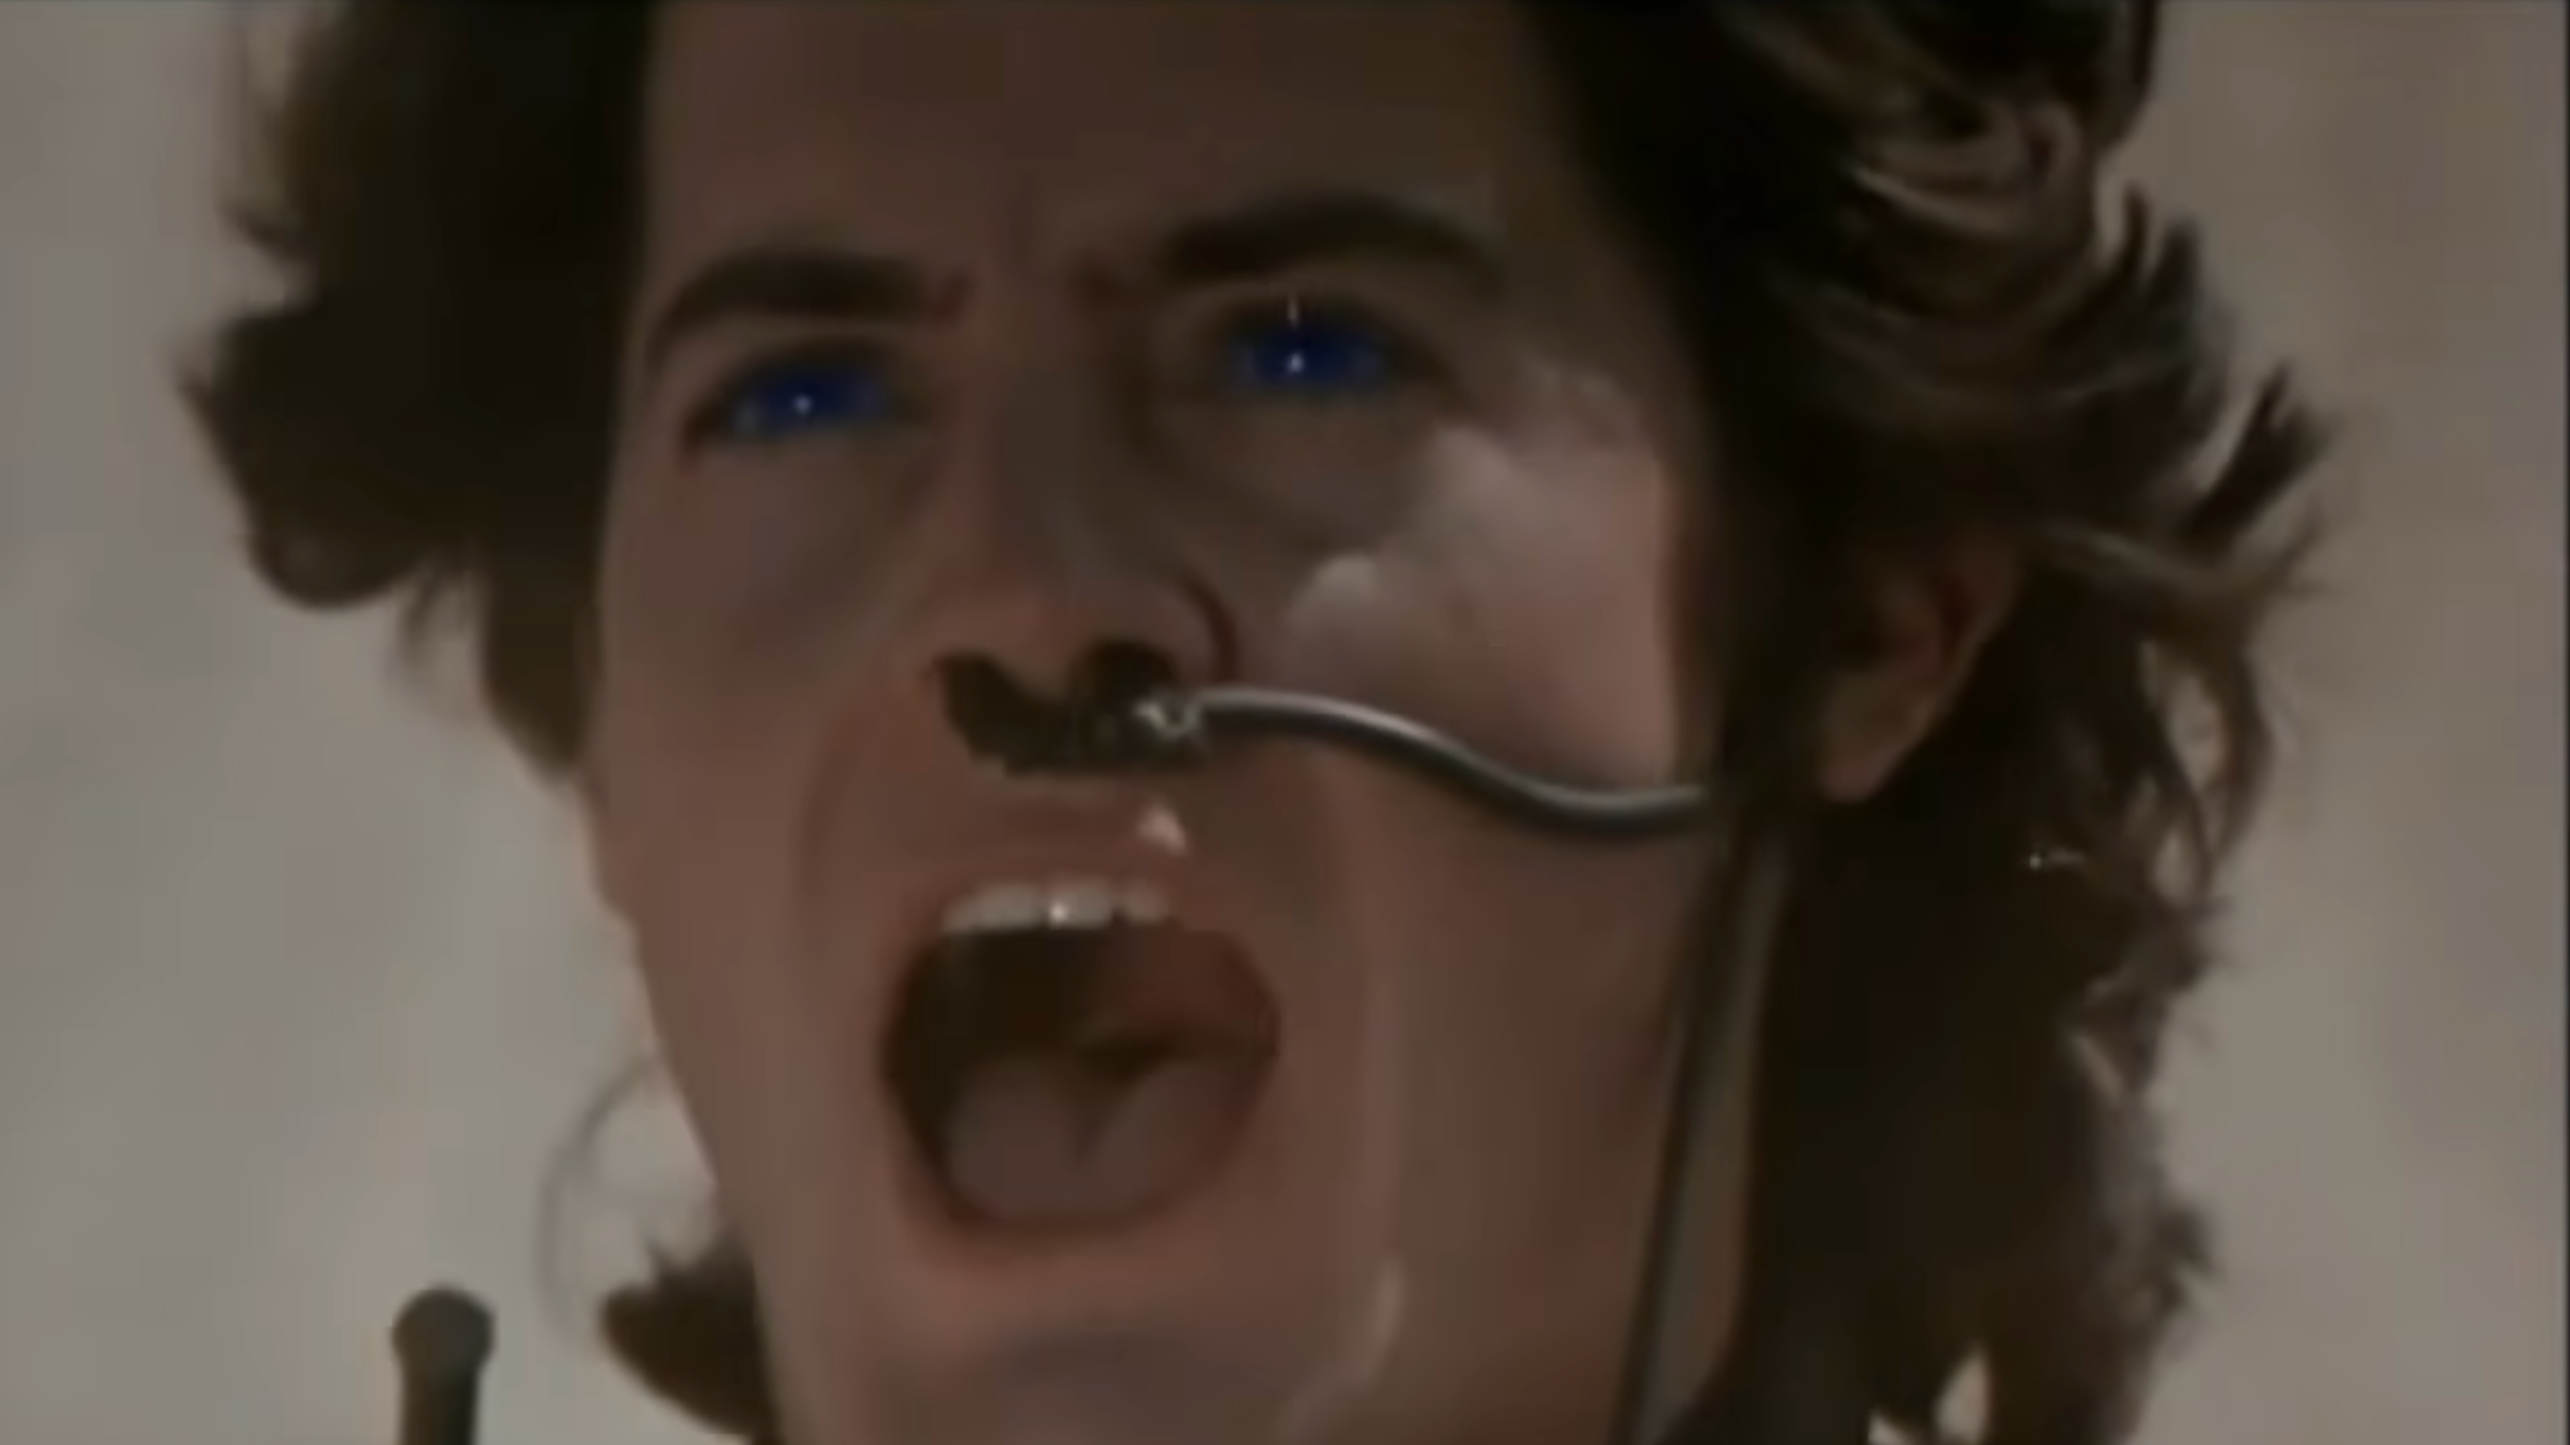 David Lynch “died a death” over Dune